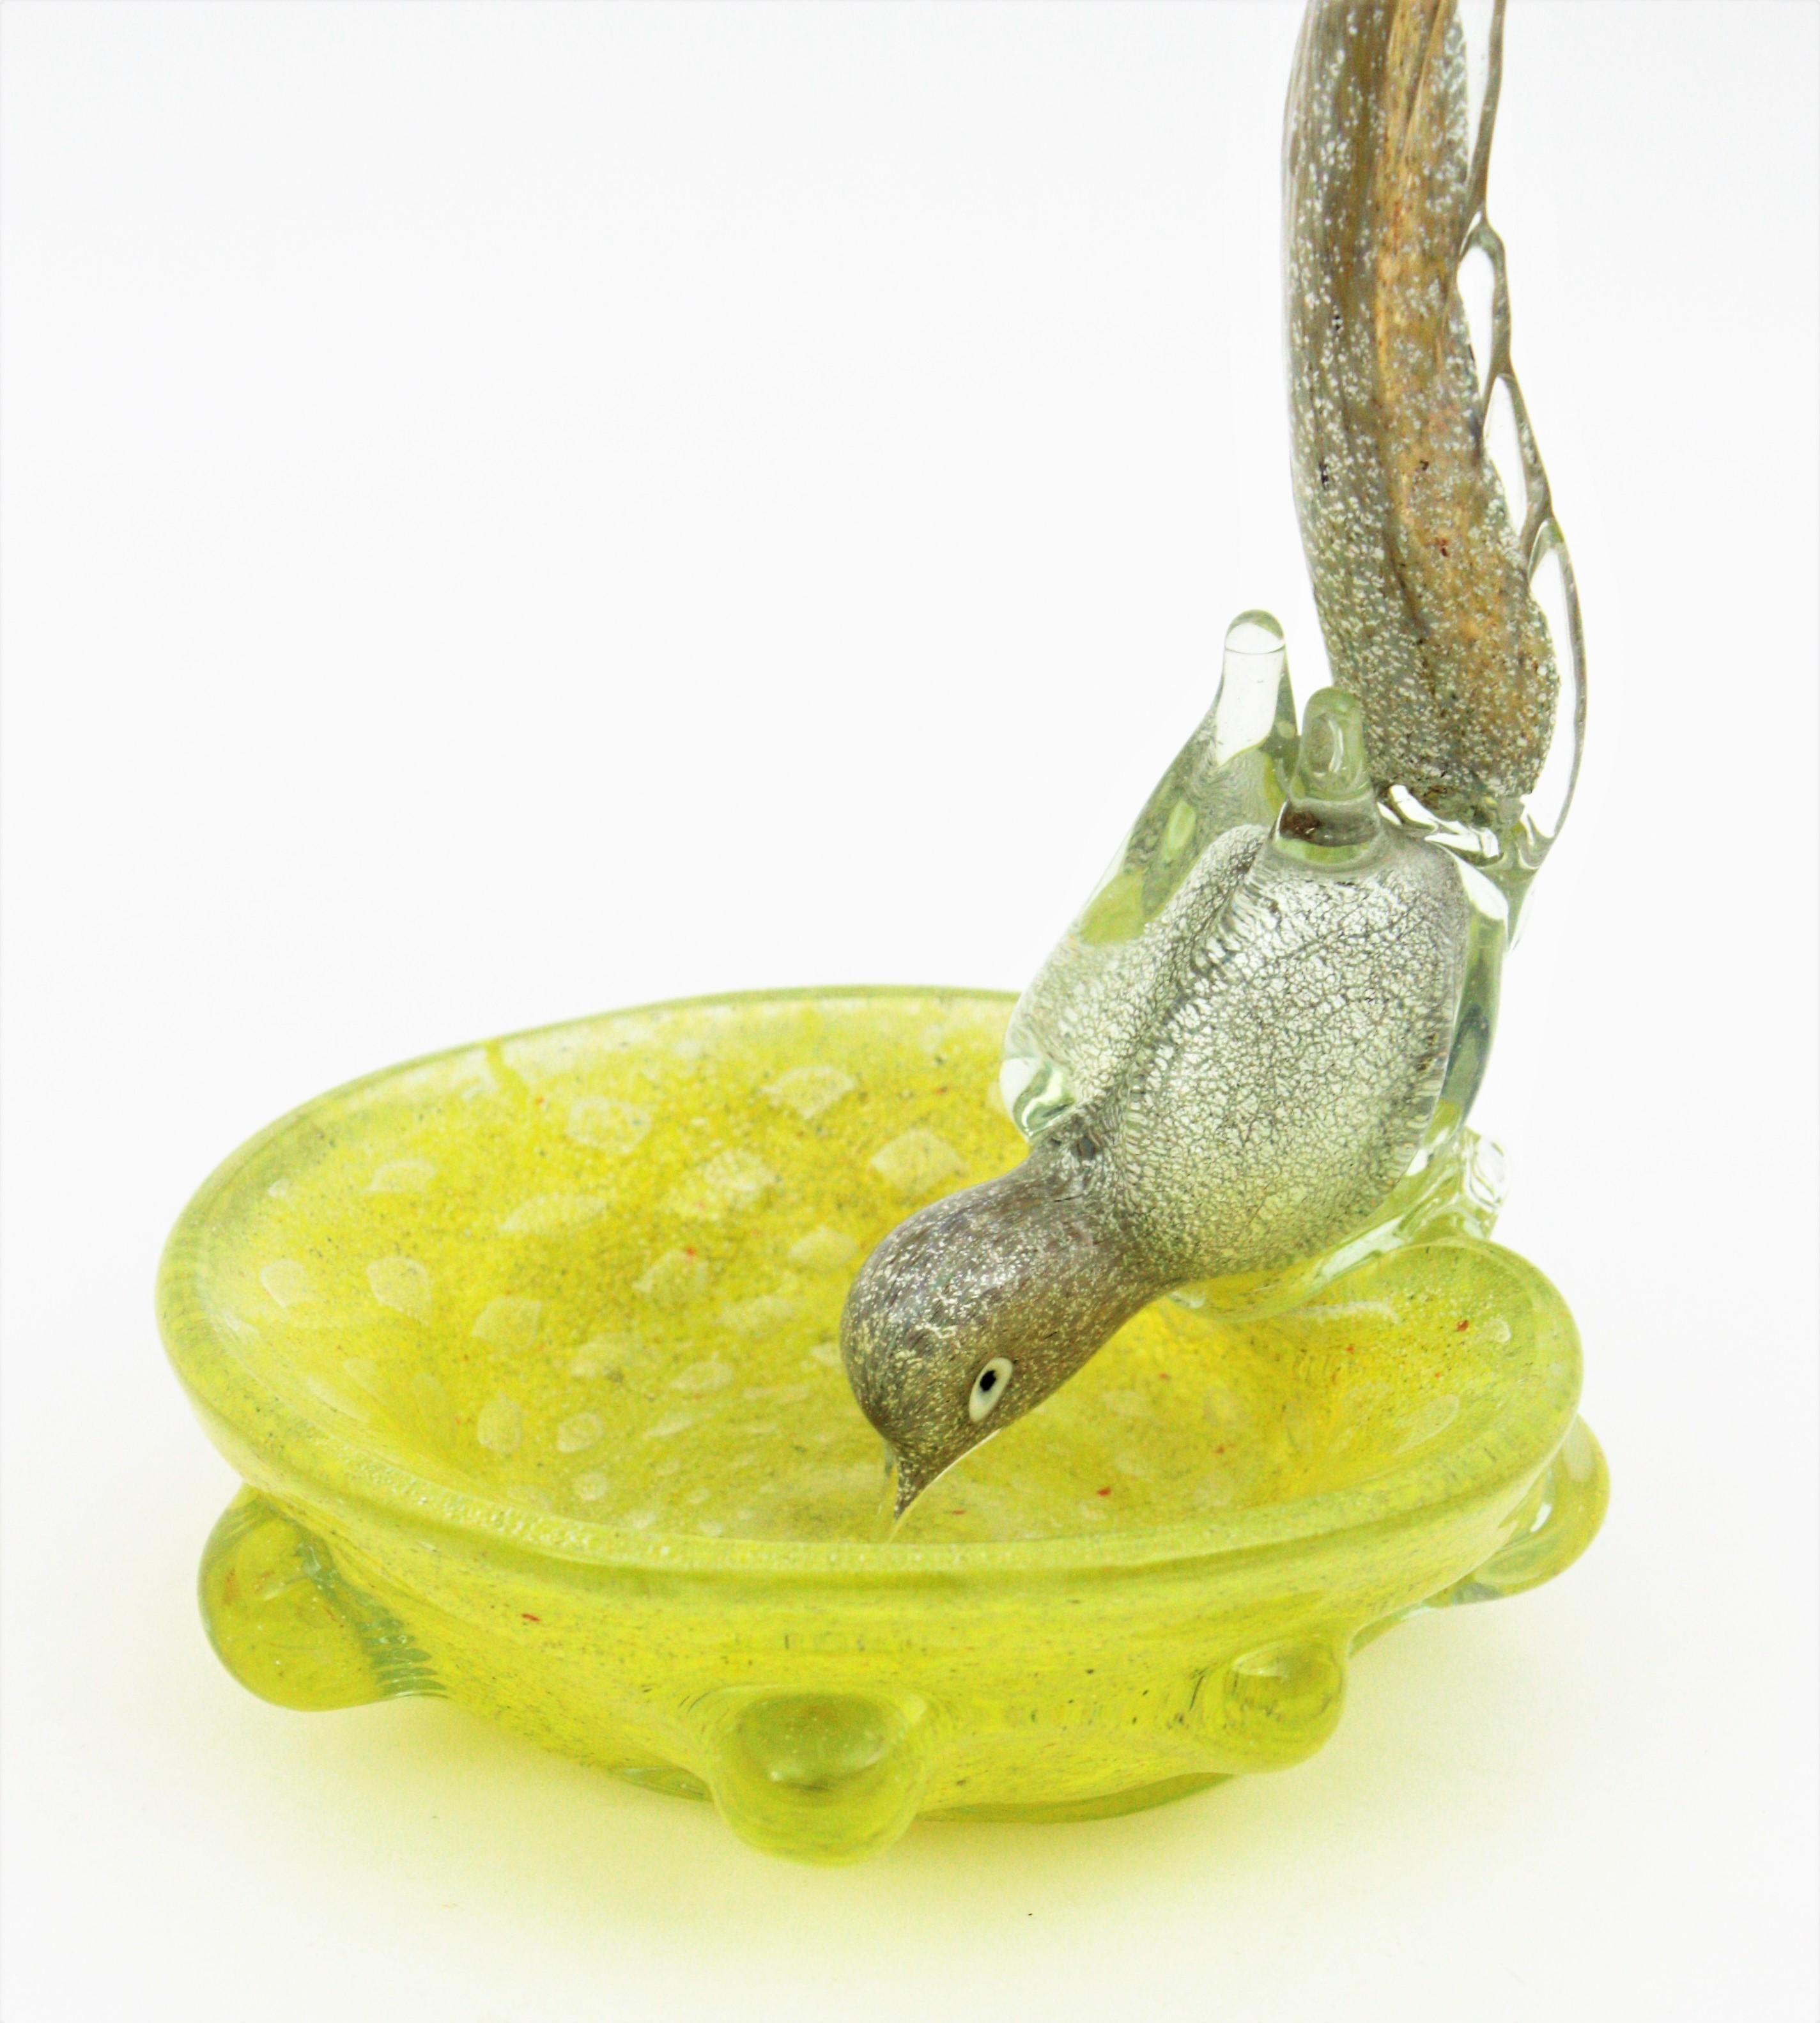 Italian Yellow Murano Art Glass Bird Bowl with Silver Flecks. Attrributed to Barovier e Toso, Italy, 1950s.
Whimsical long tailed drinking bird in clear glass with silver and gold flecks on a controlled bubbles silver flecked yellow Murano glass